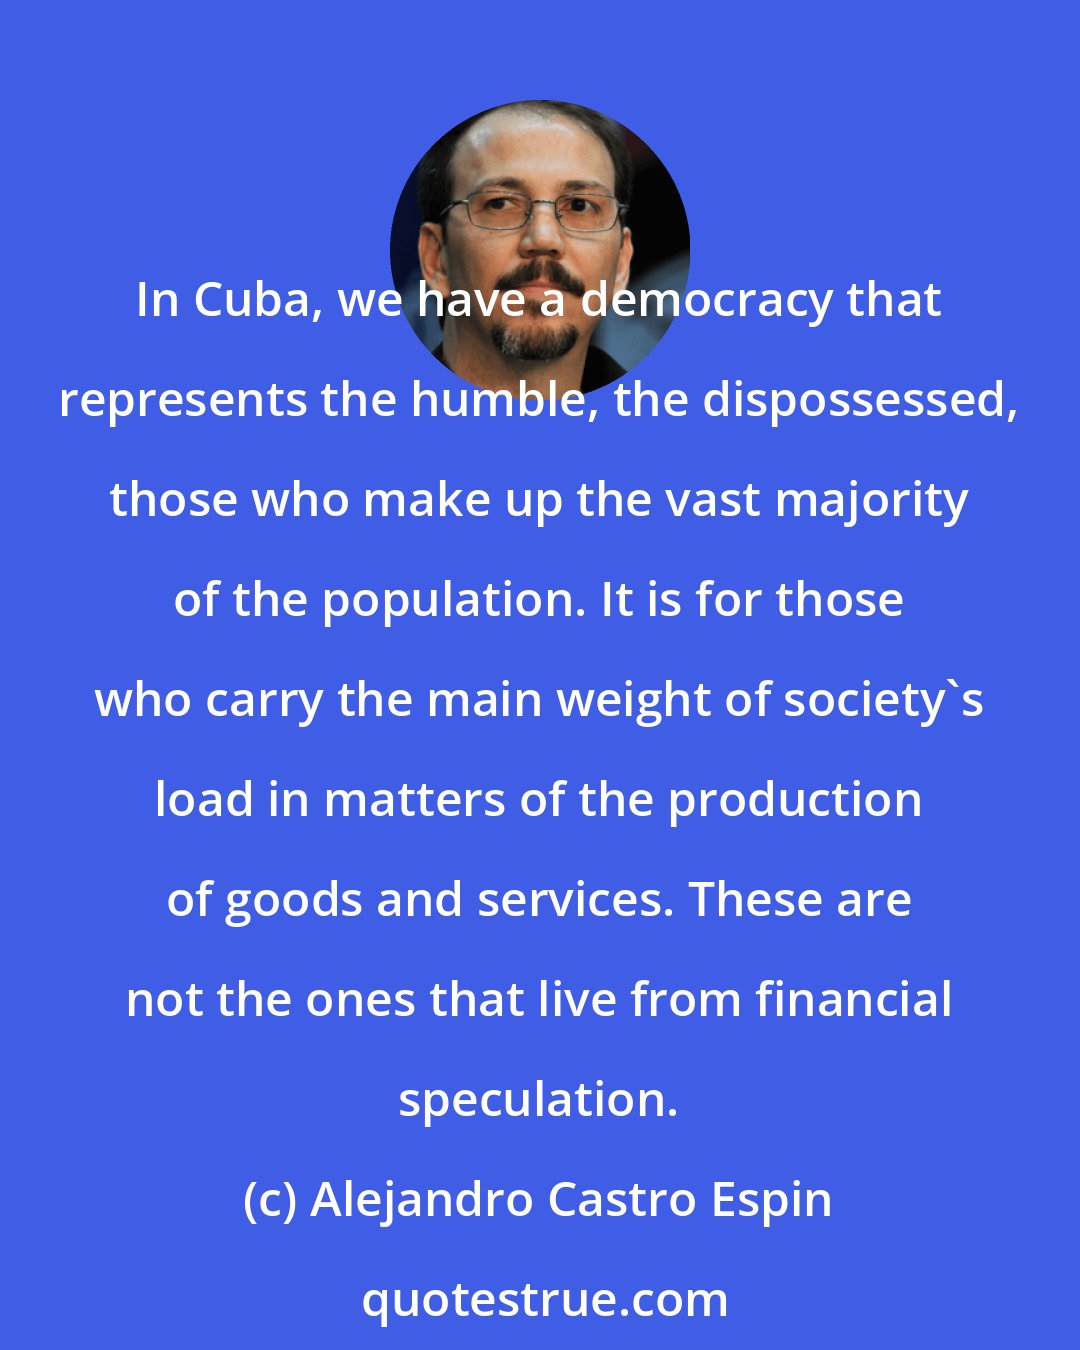 Alejandro Castro Espin: In Cuba, we have a democracy that represents the humble, the dispossessed, those who make up the vast majority of the population. It is for those who carry the main weight of society's load in matters of the production of goods and services. These are not the ones that live from financial speculation.